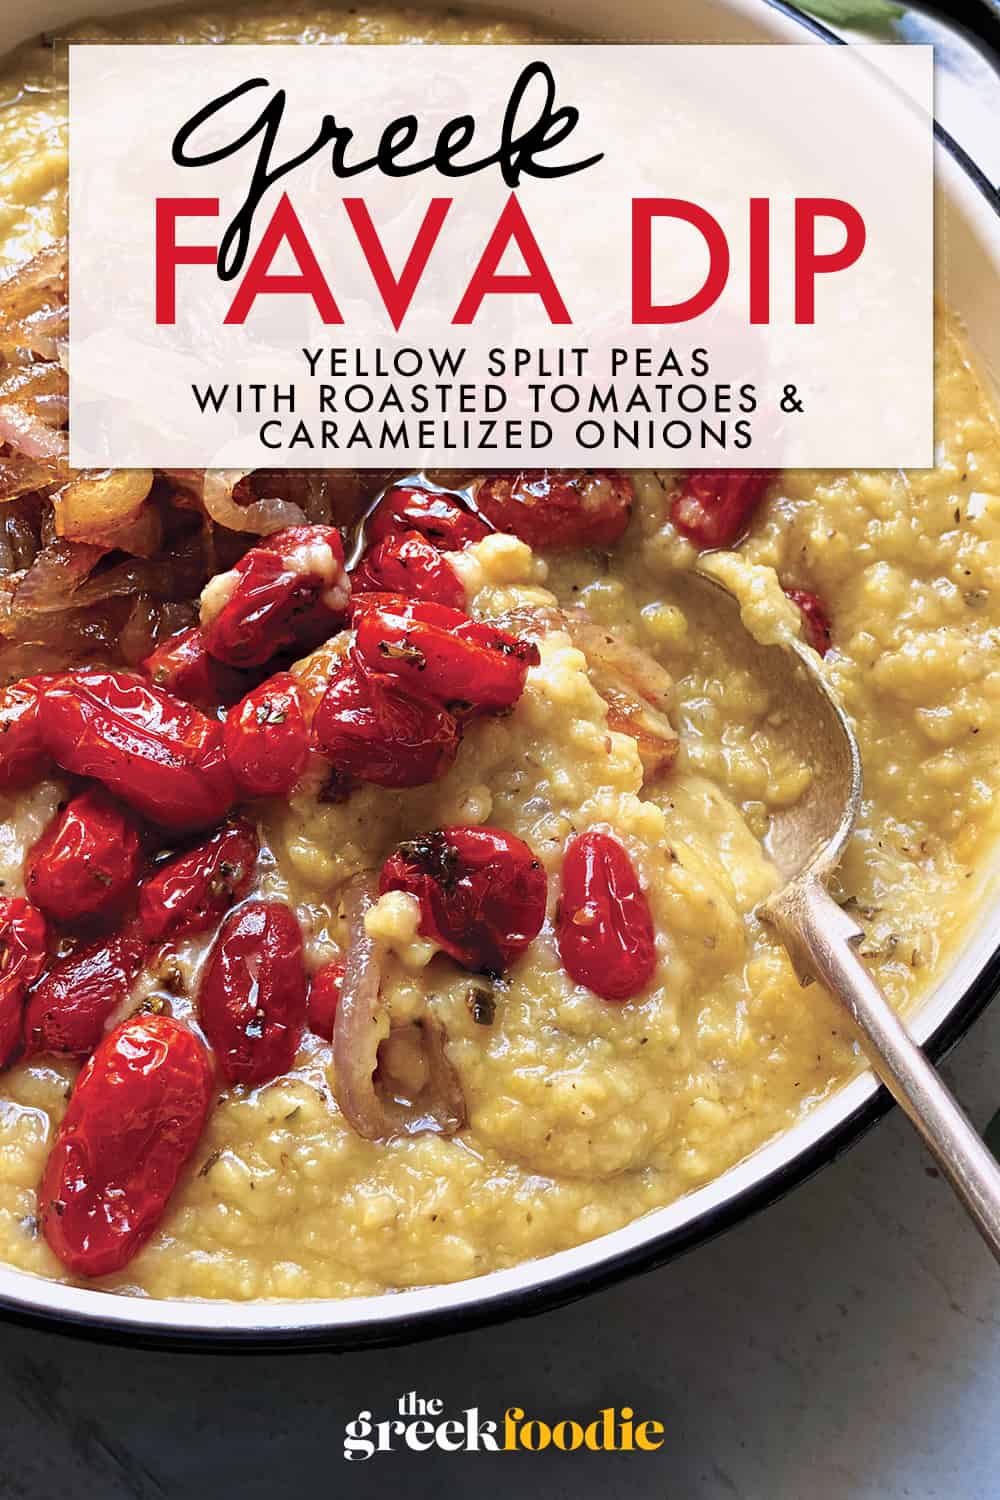 Greek Fava Dip With Roasted Tomatoes And Caramelized Onions